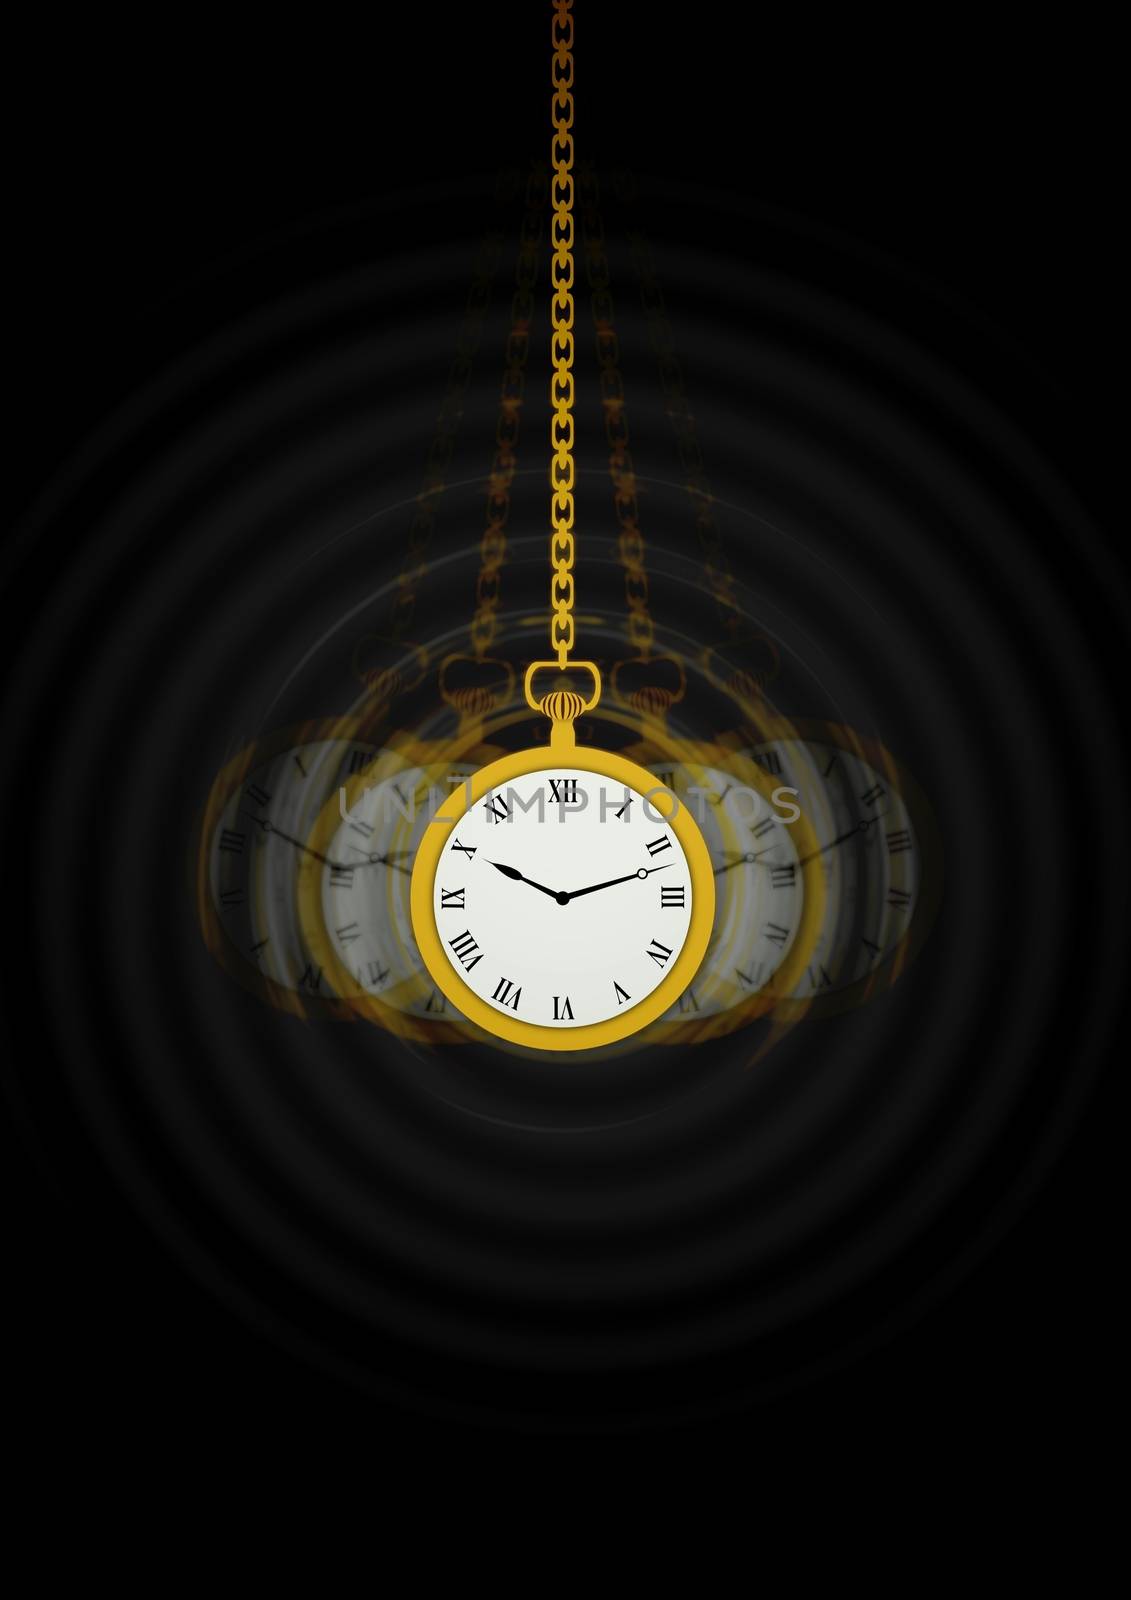 Illustration of a Hypnotists pocket watch with motion trails